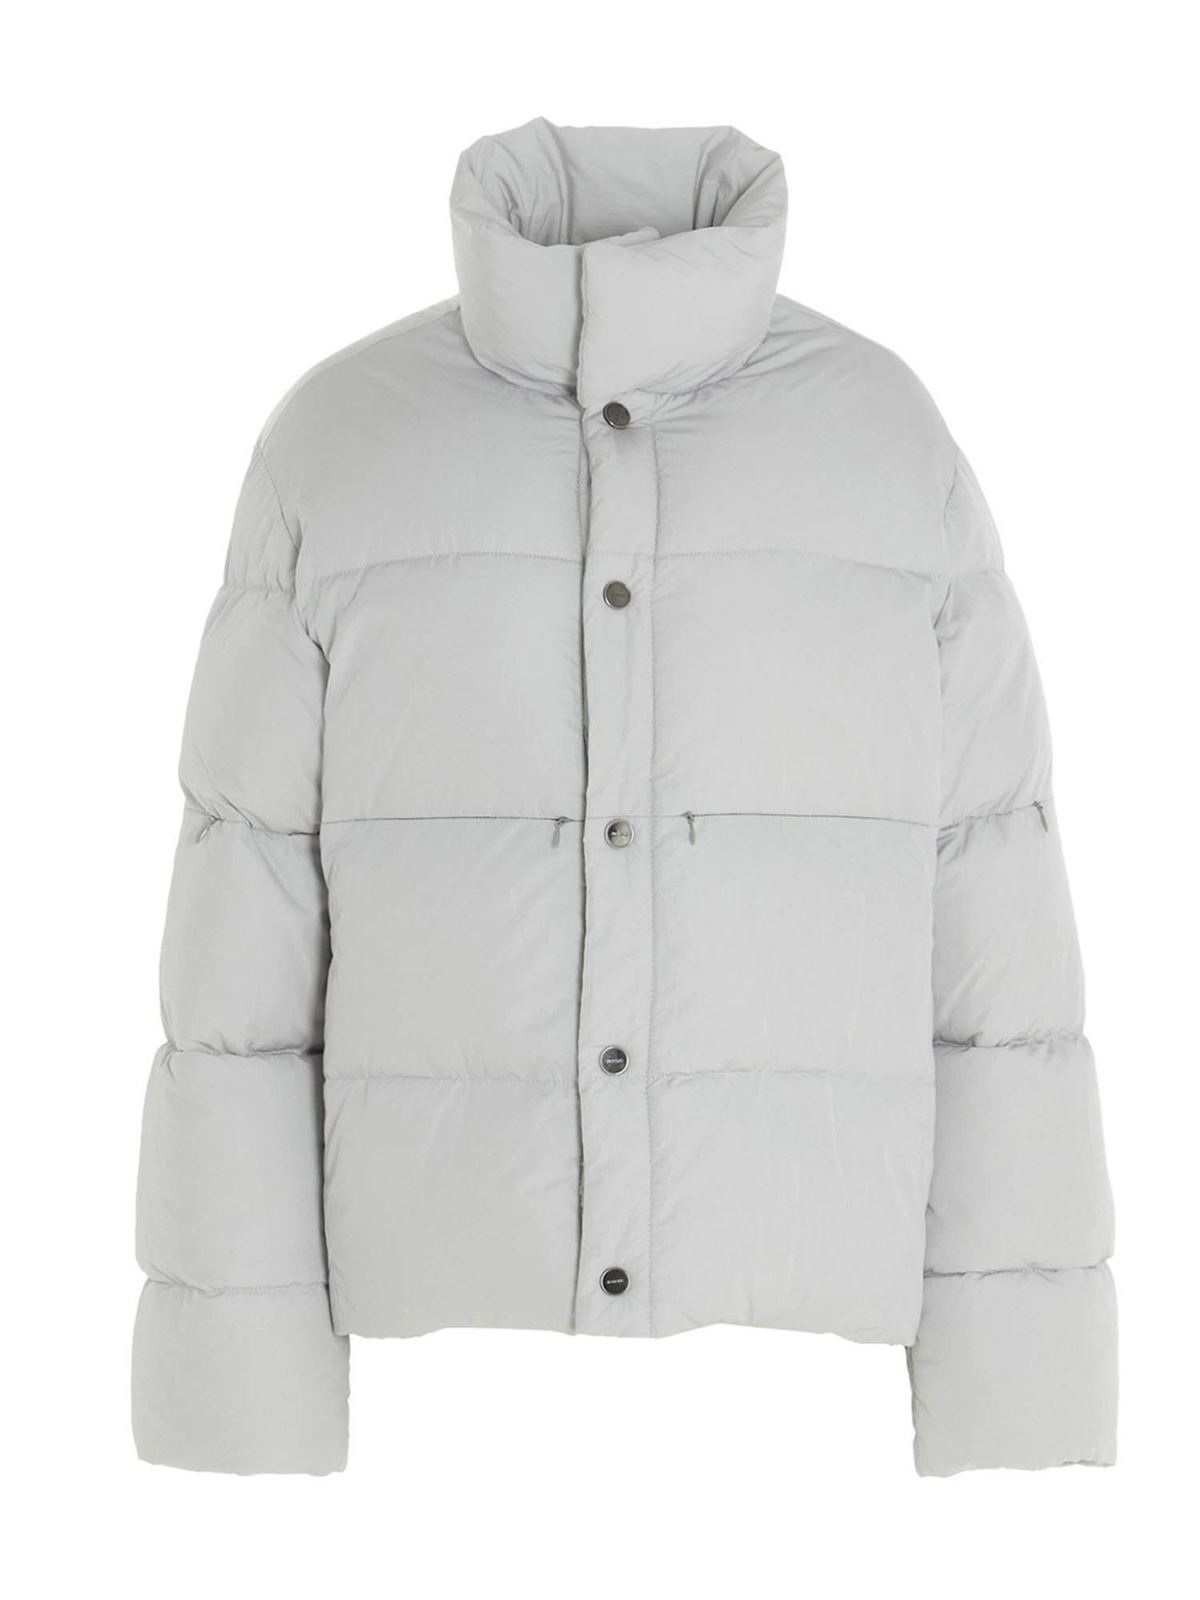 Jacquemus - La Doudoune down jacket in light grey - padded jackets ...